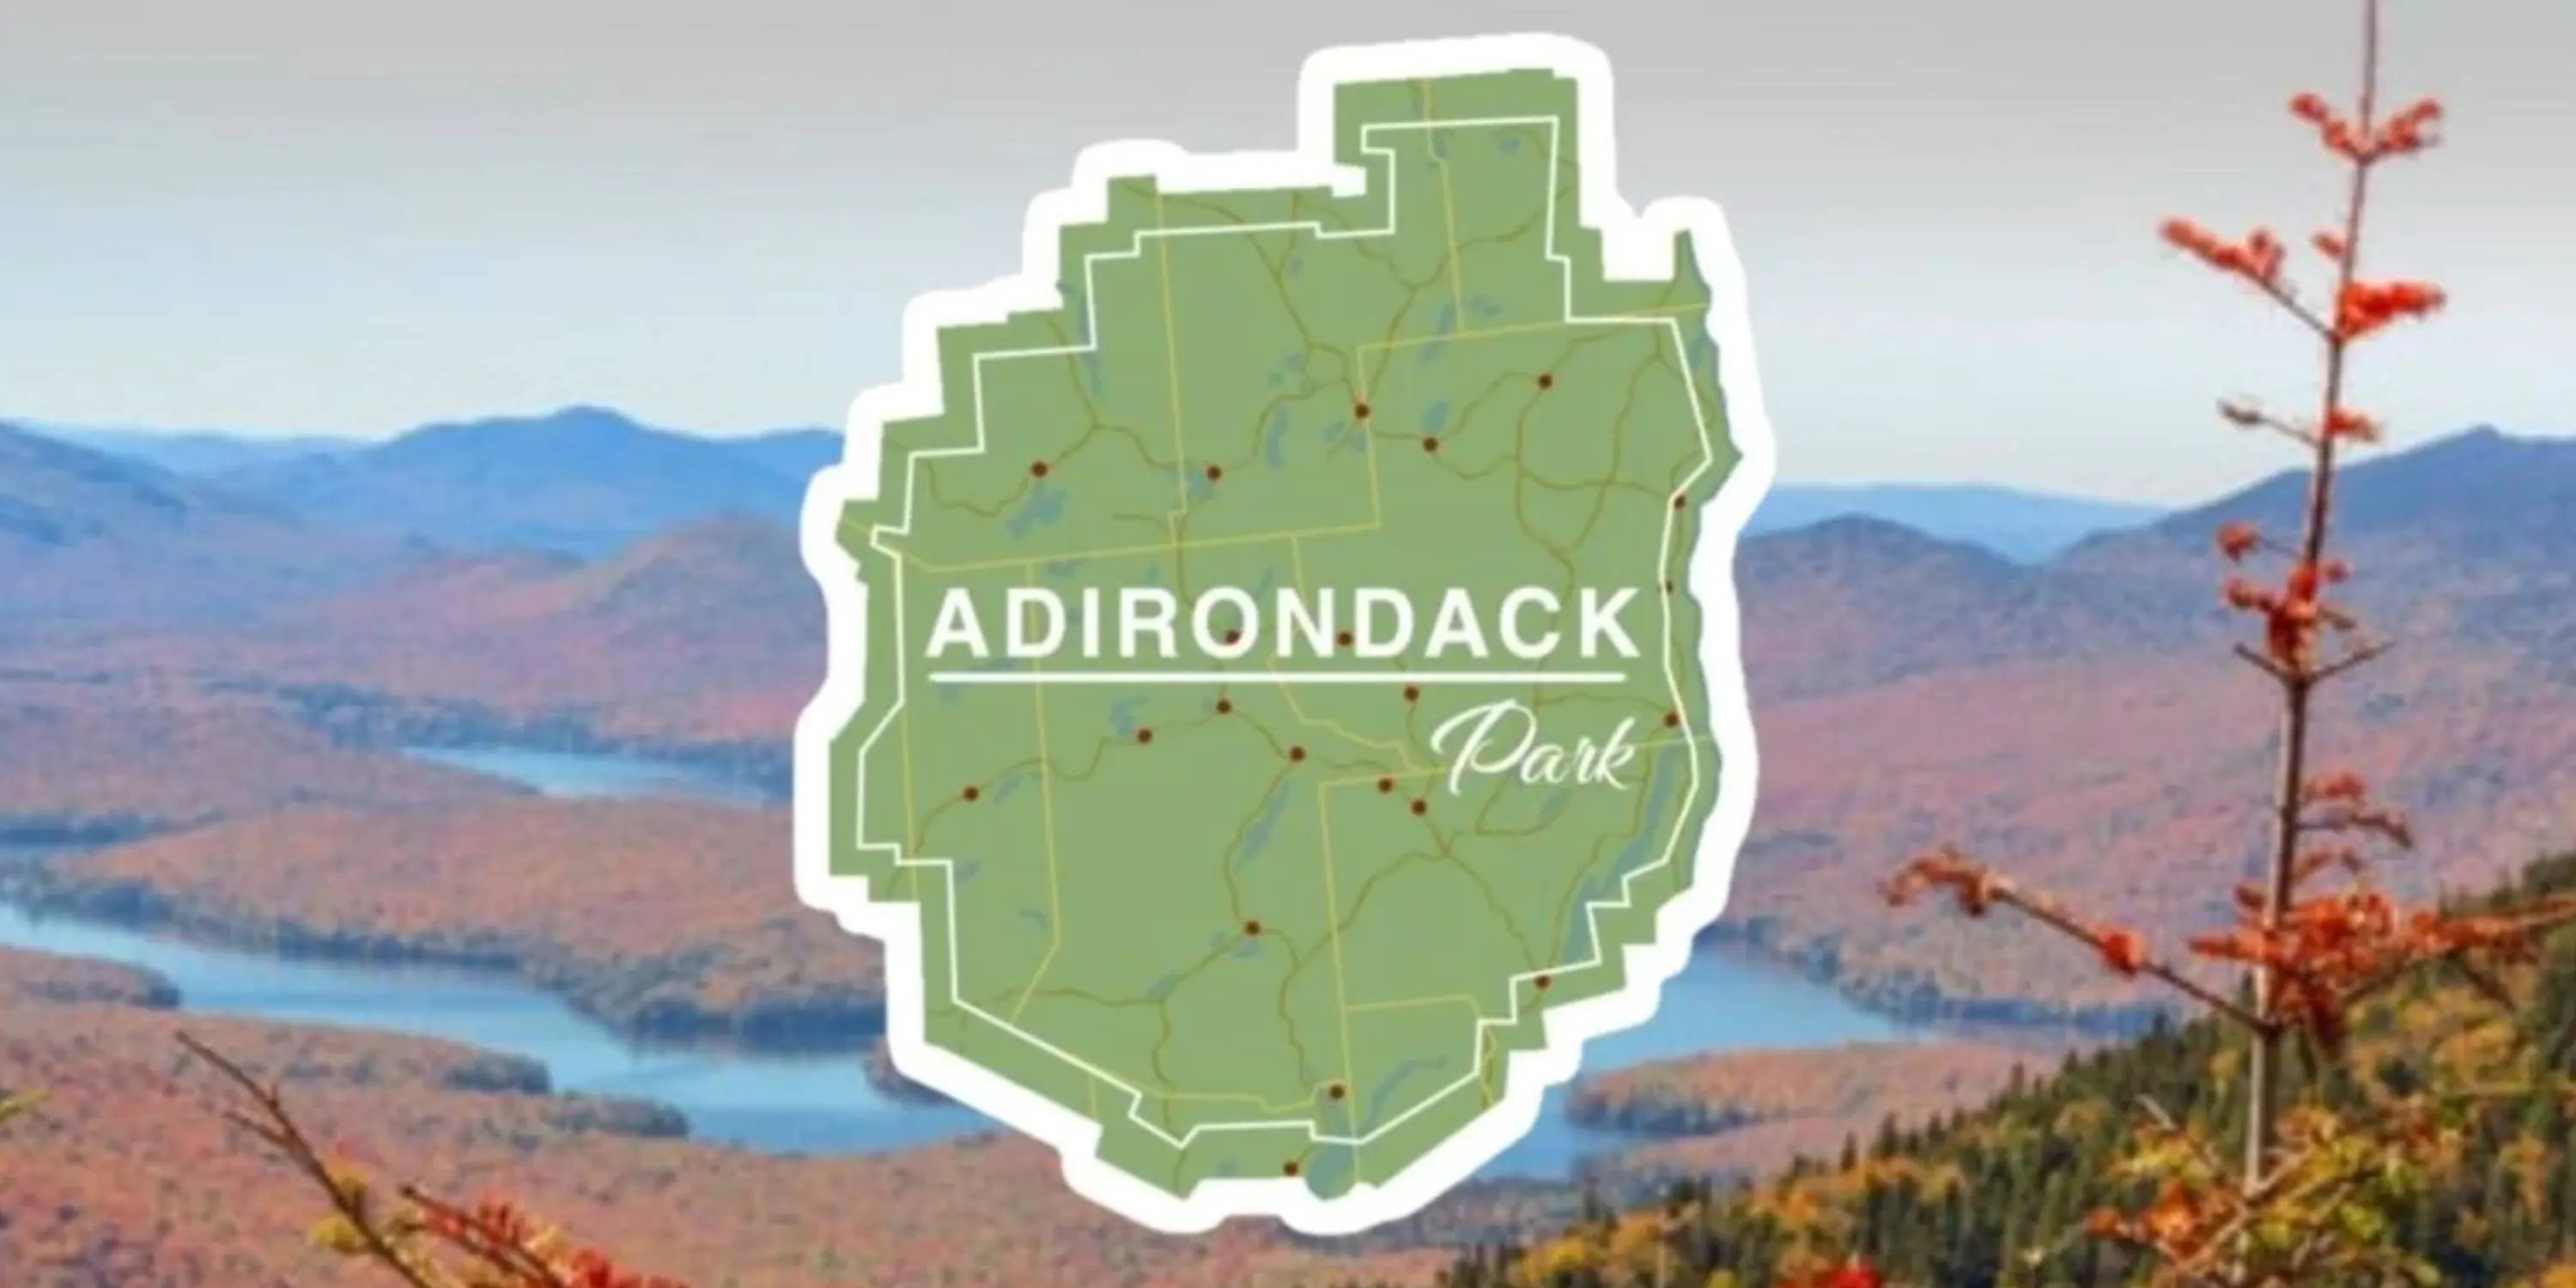 Outline of the Adirondack Park in New York State